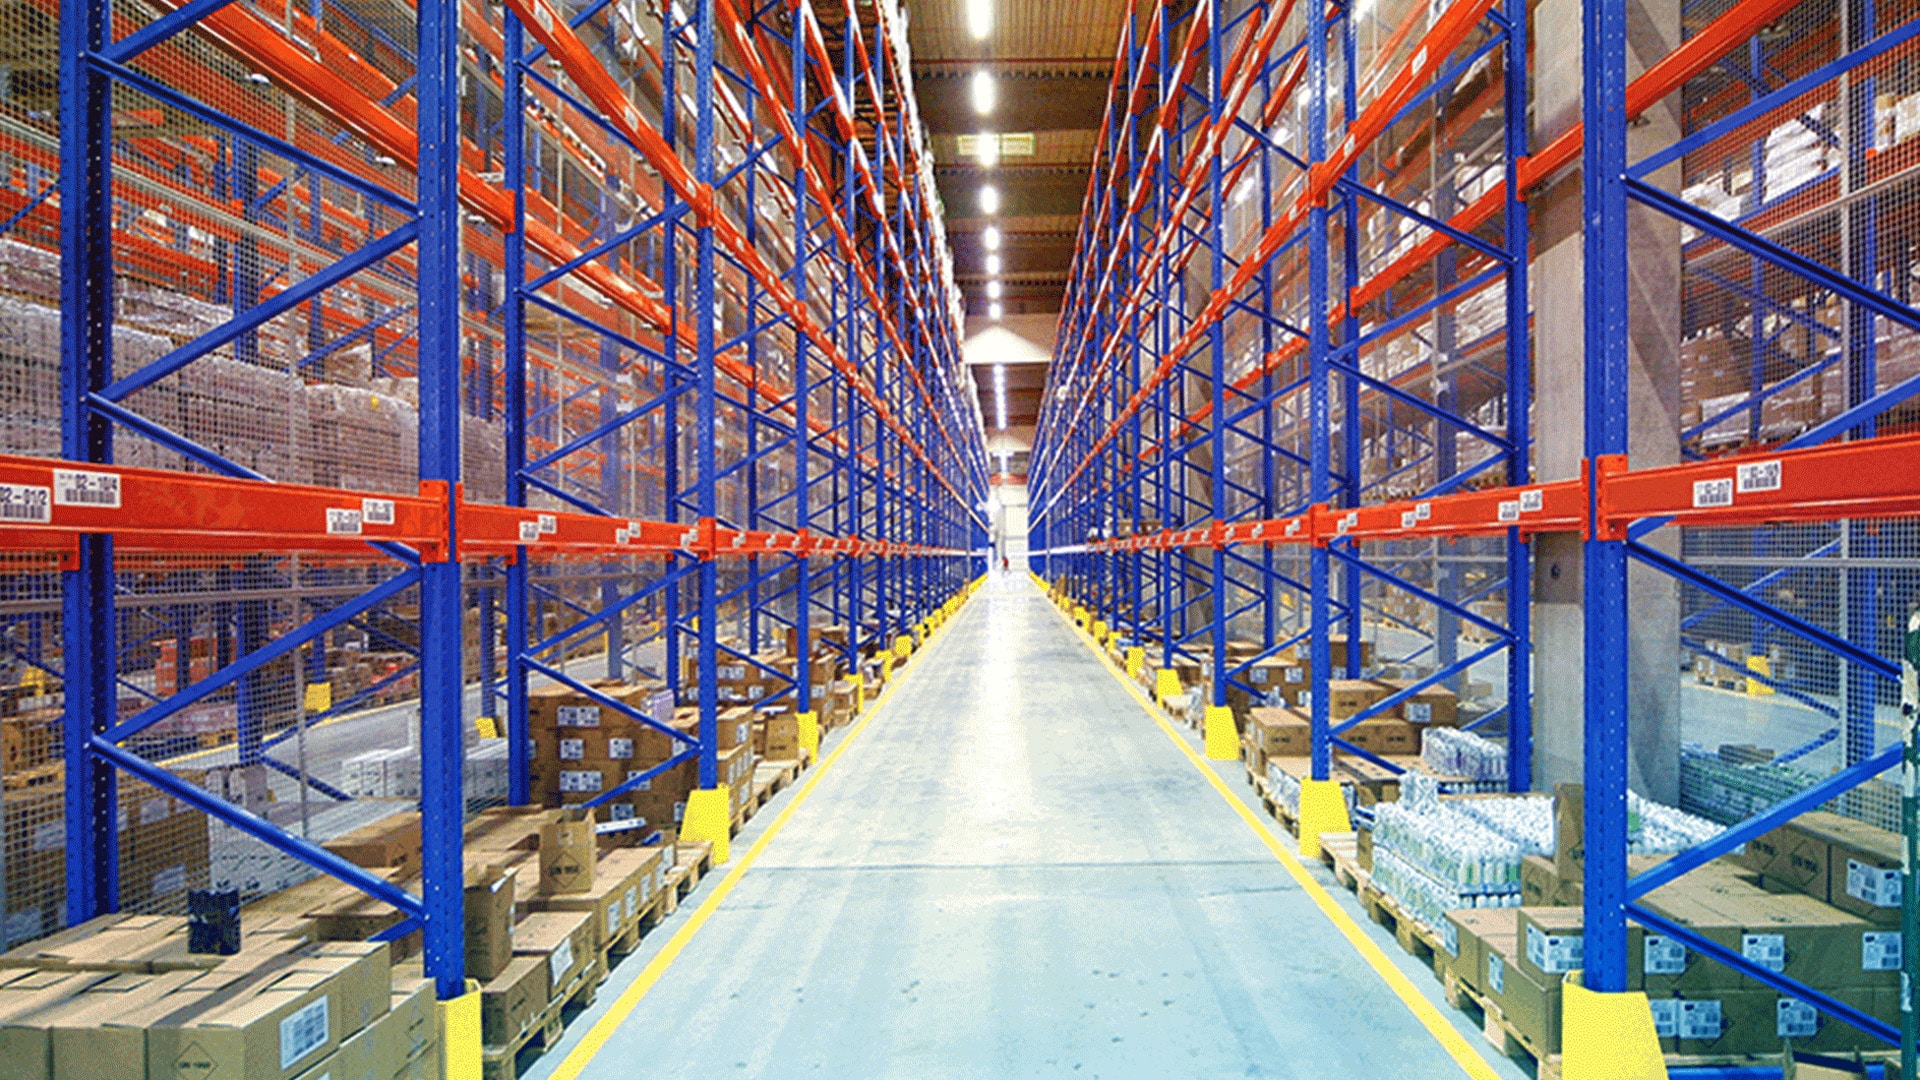 Macrotech Developers, Bain Capital, Ivanho Cambridge to invest $1bn to develop warehousing parks